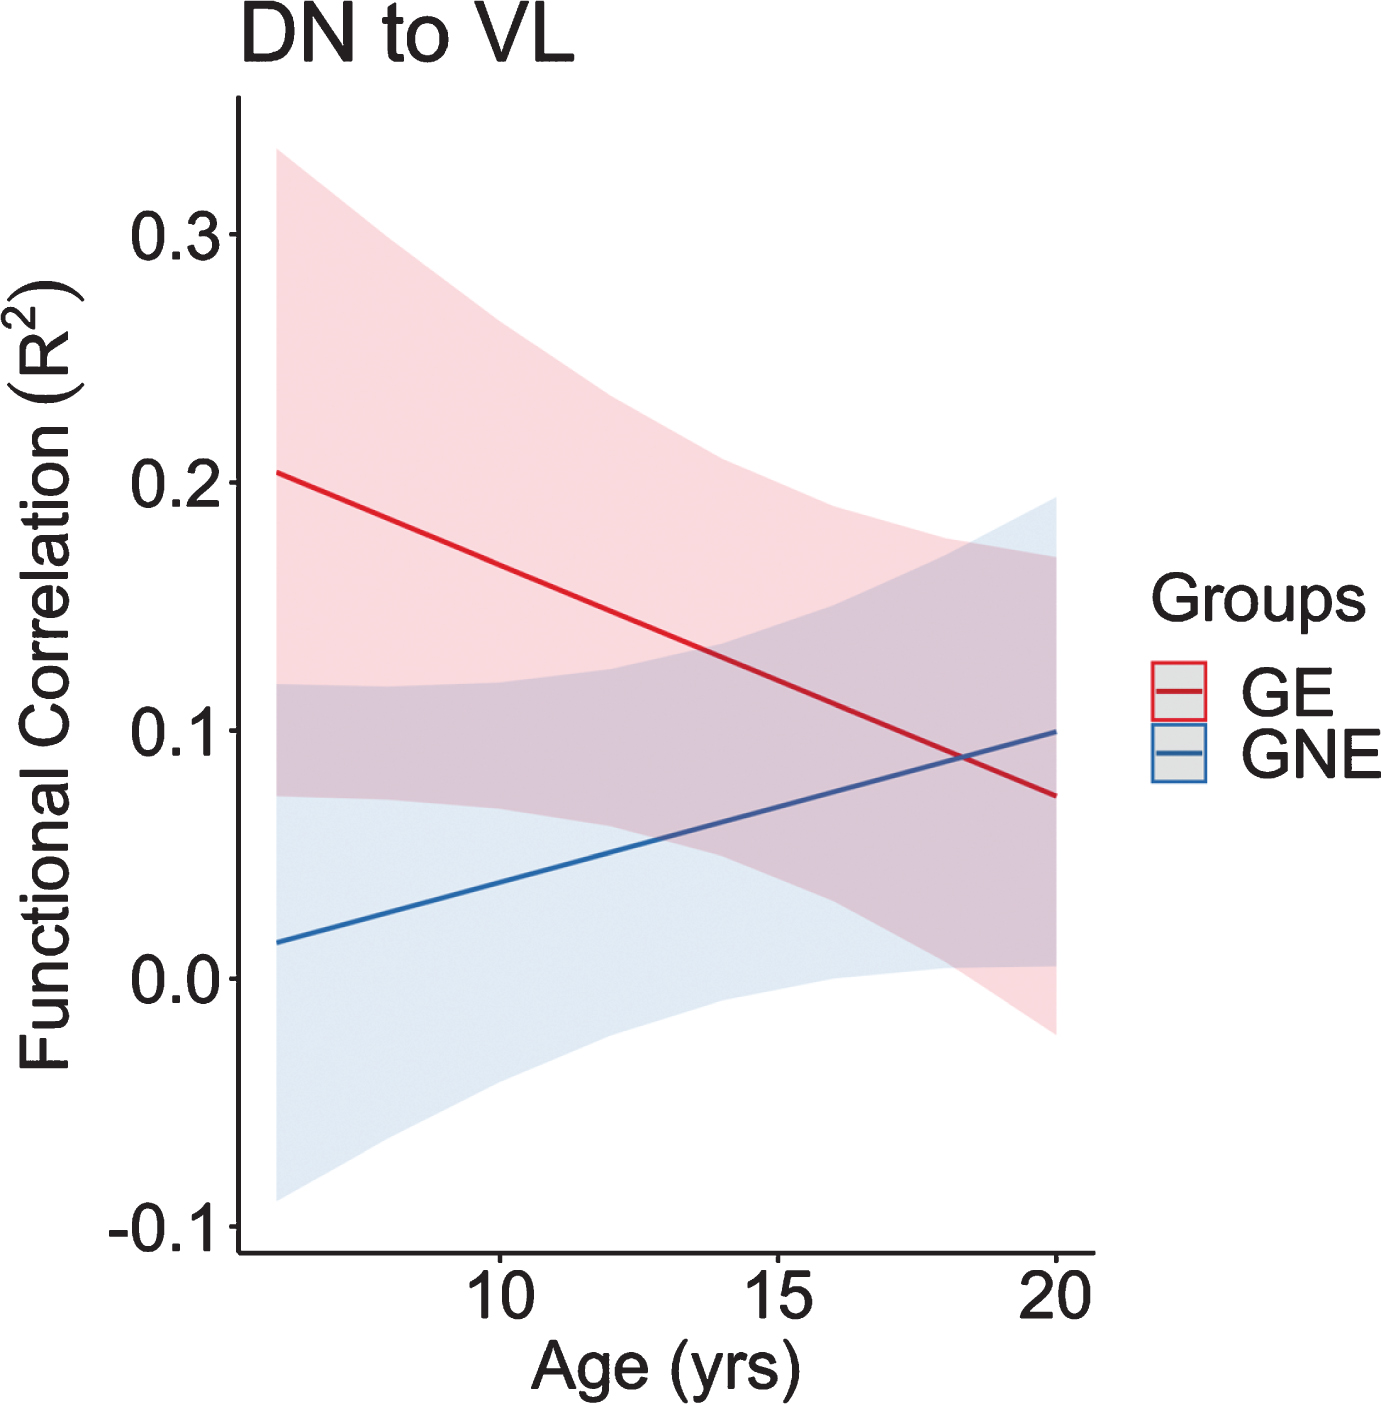 This figure represents the predicted values from a linear mixed effects regression model of the functional connectivity (R2) between the dentate nucleus and ventrolateral nucleus of the thalamus (dependent variable) over time between groups (age×group interaction term). The model controlled for age, sex, and scanner, and included a sex×group interaction term and a random effect term per participant’s slope of age, and a random effect term per family to account for participants who were siblings. GE, gene expanded; GNE, gene nonexpanded.